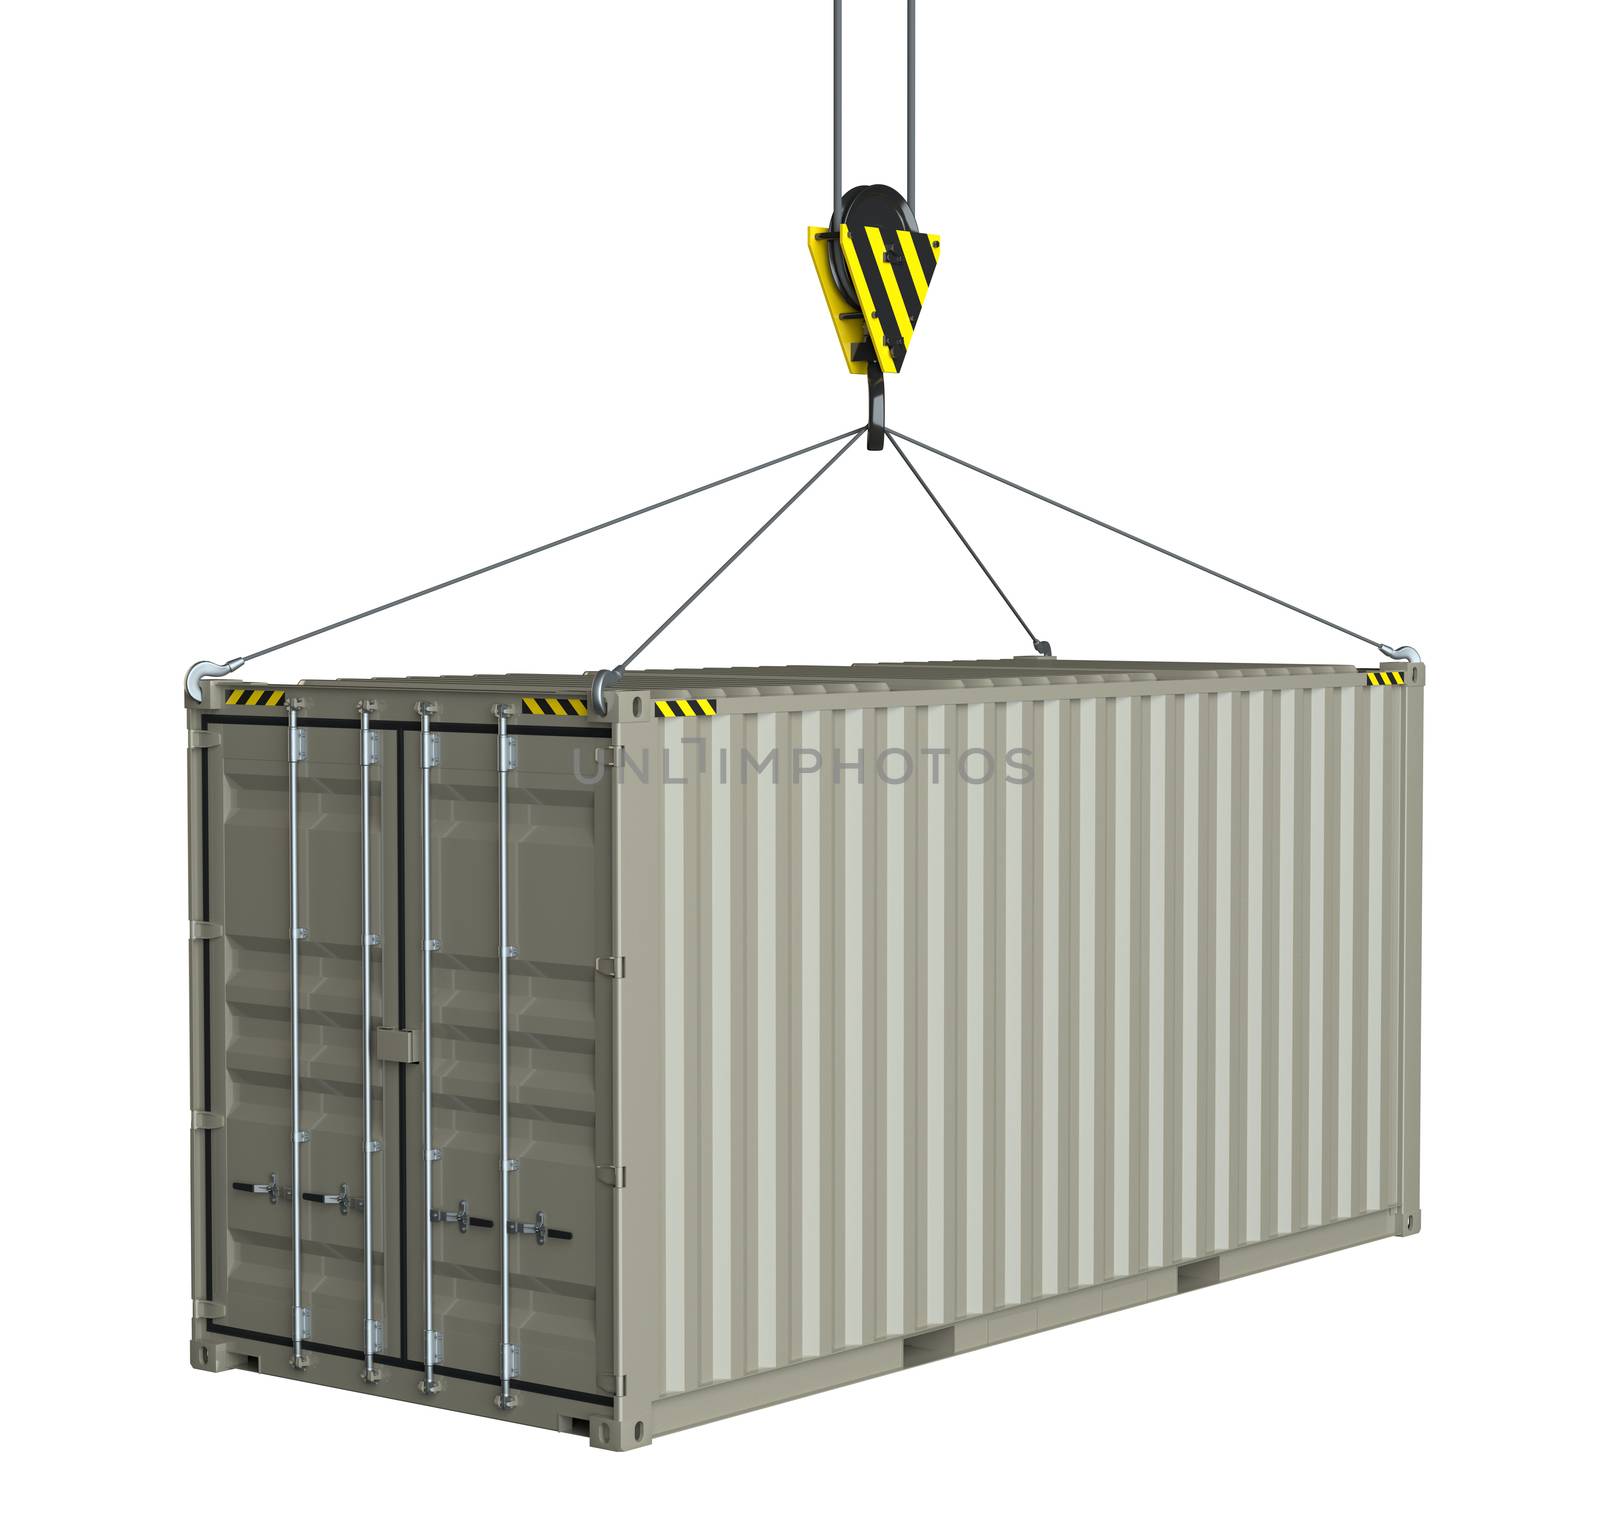 Service delivery - cargo container hoisted by hook by cherezoff